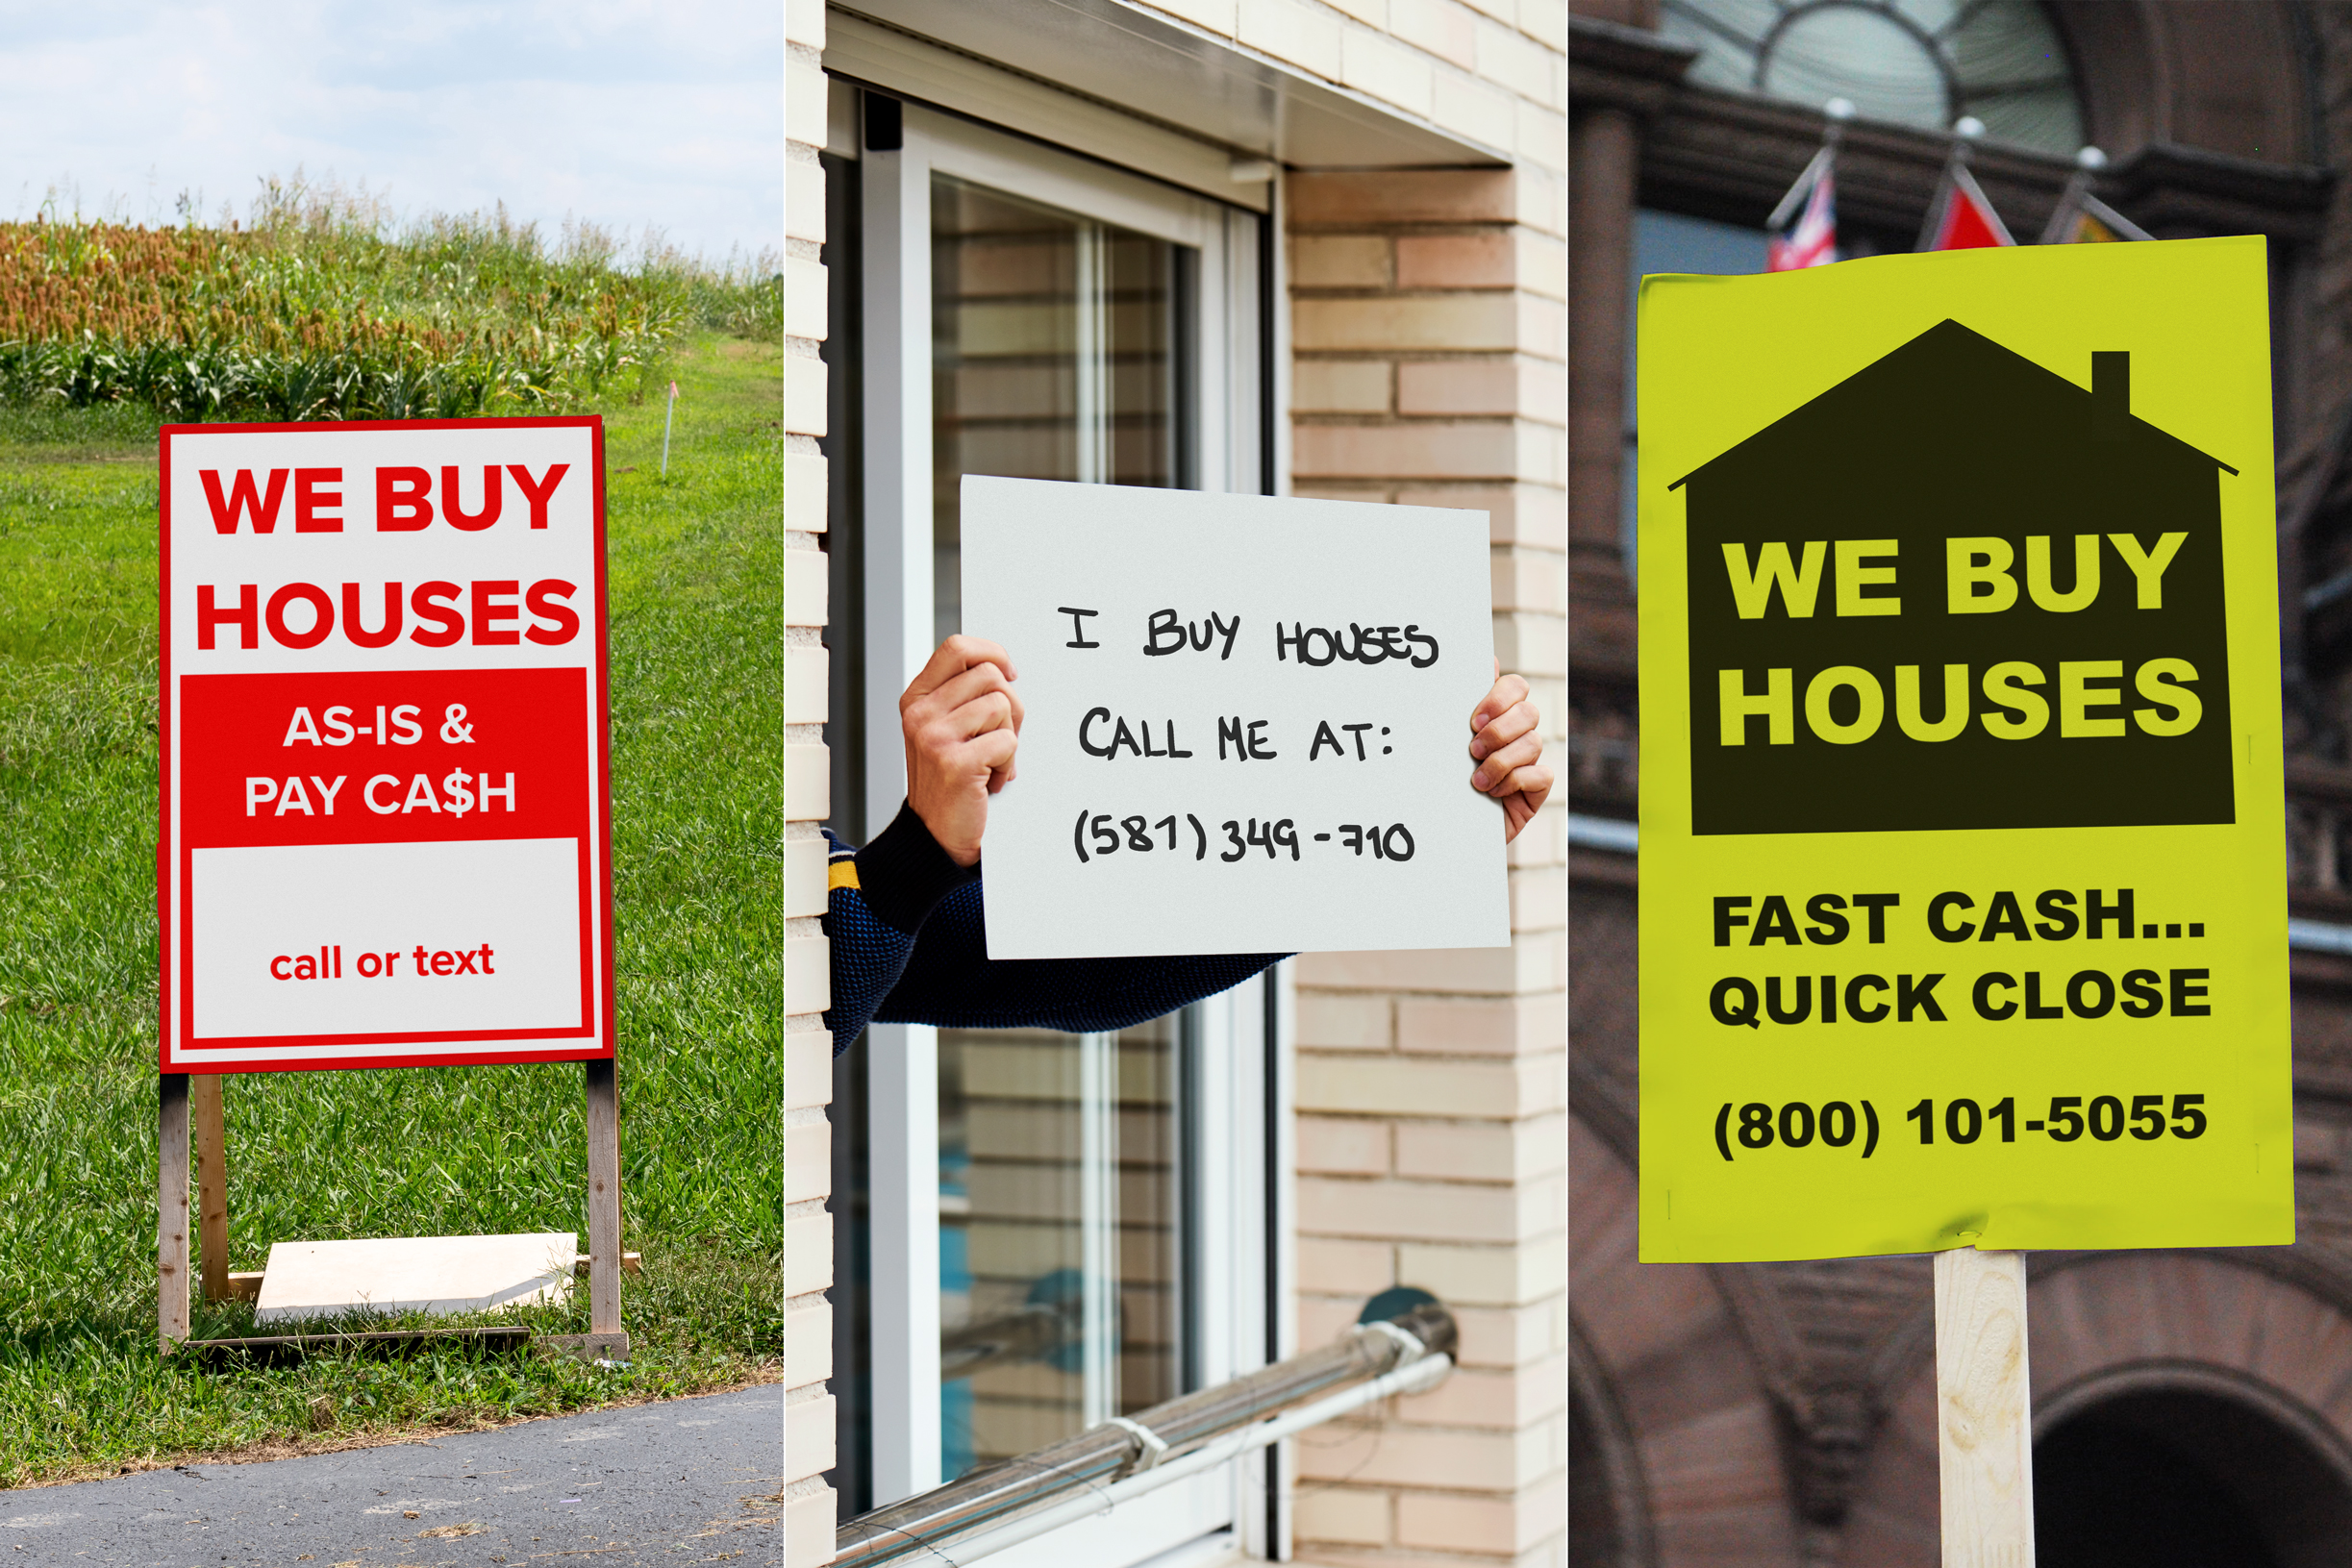 What's the Deal With All Those Shady 'We Buy Houses' Signs?